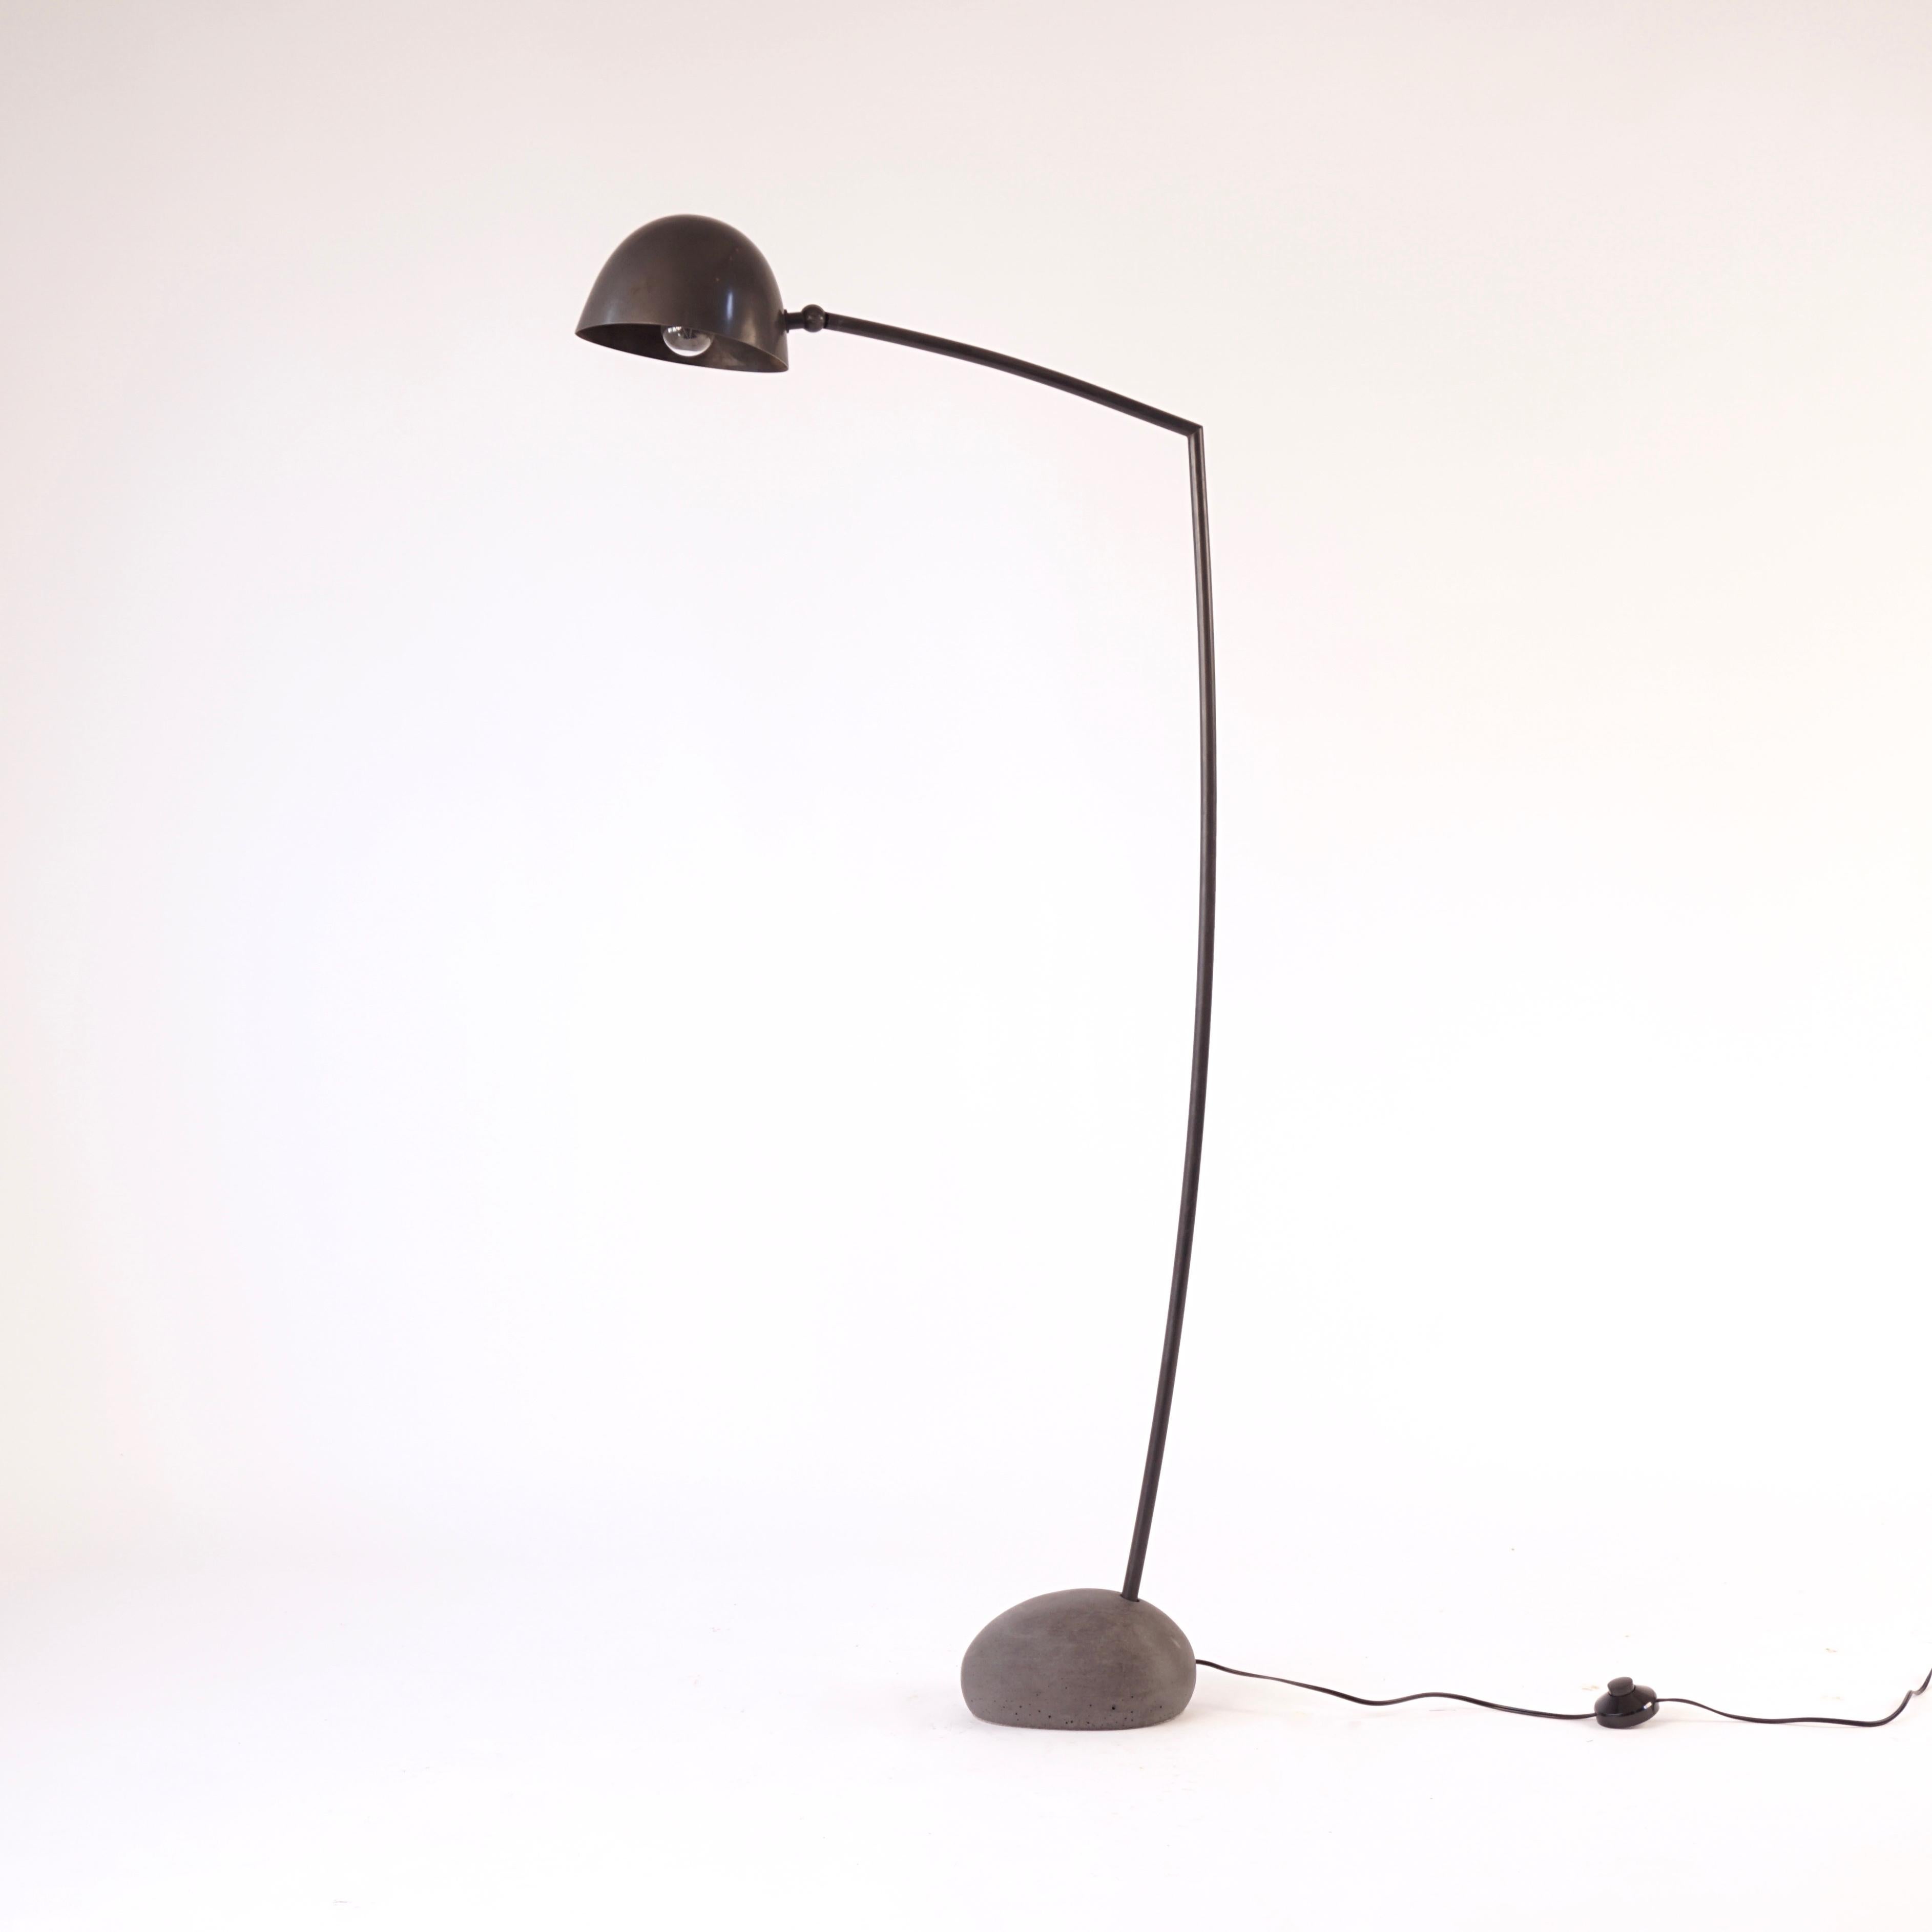 This is the medium version of the Skye floor lamp. This dark colored cement base was made with forms taken from actual stones from the Isle of Skye. The hand spun shade and arm are solid bronze with an acid darkened patina. The shade articulates